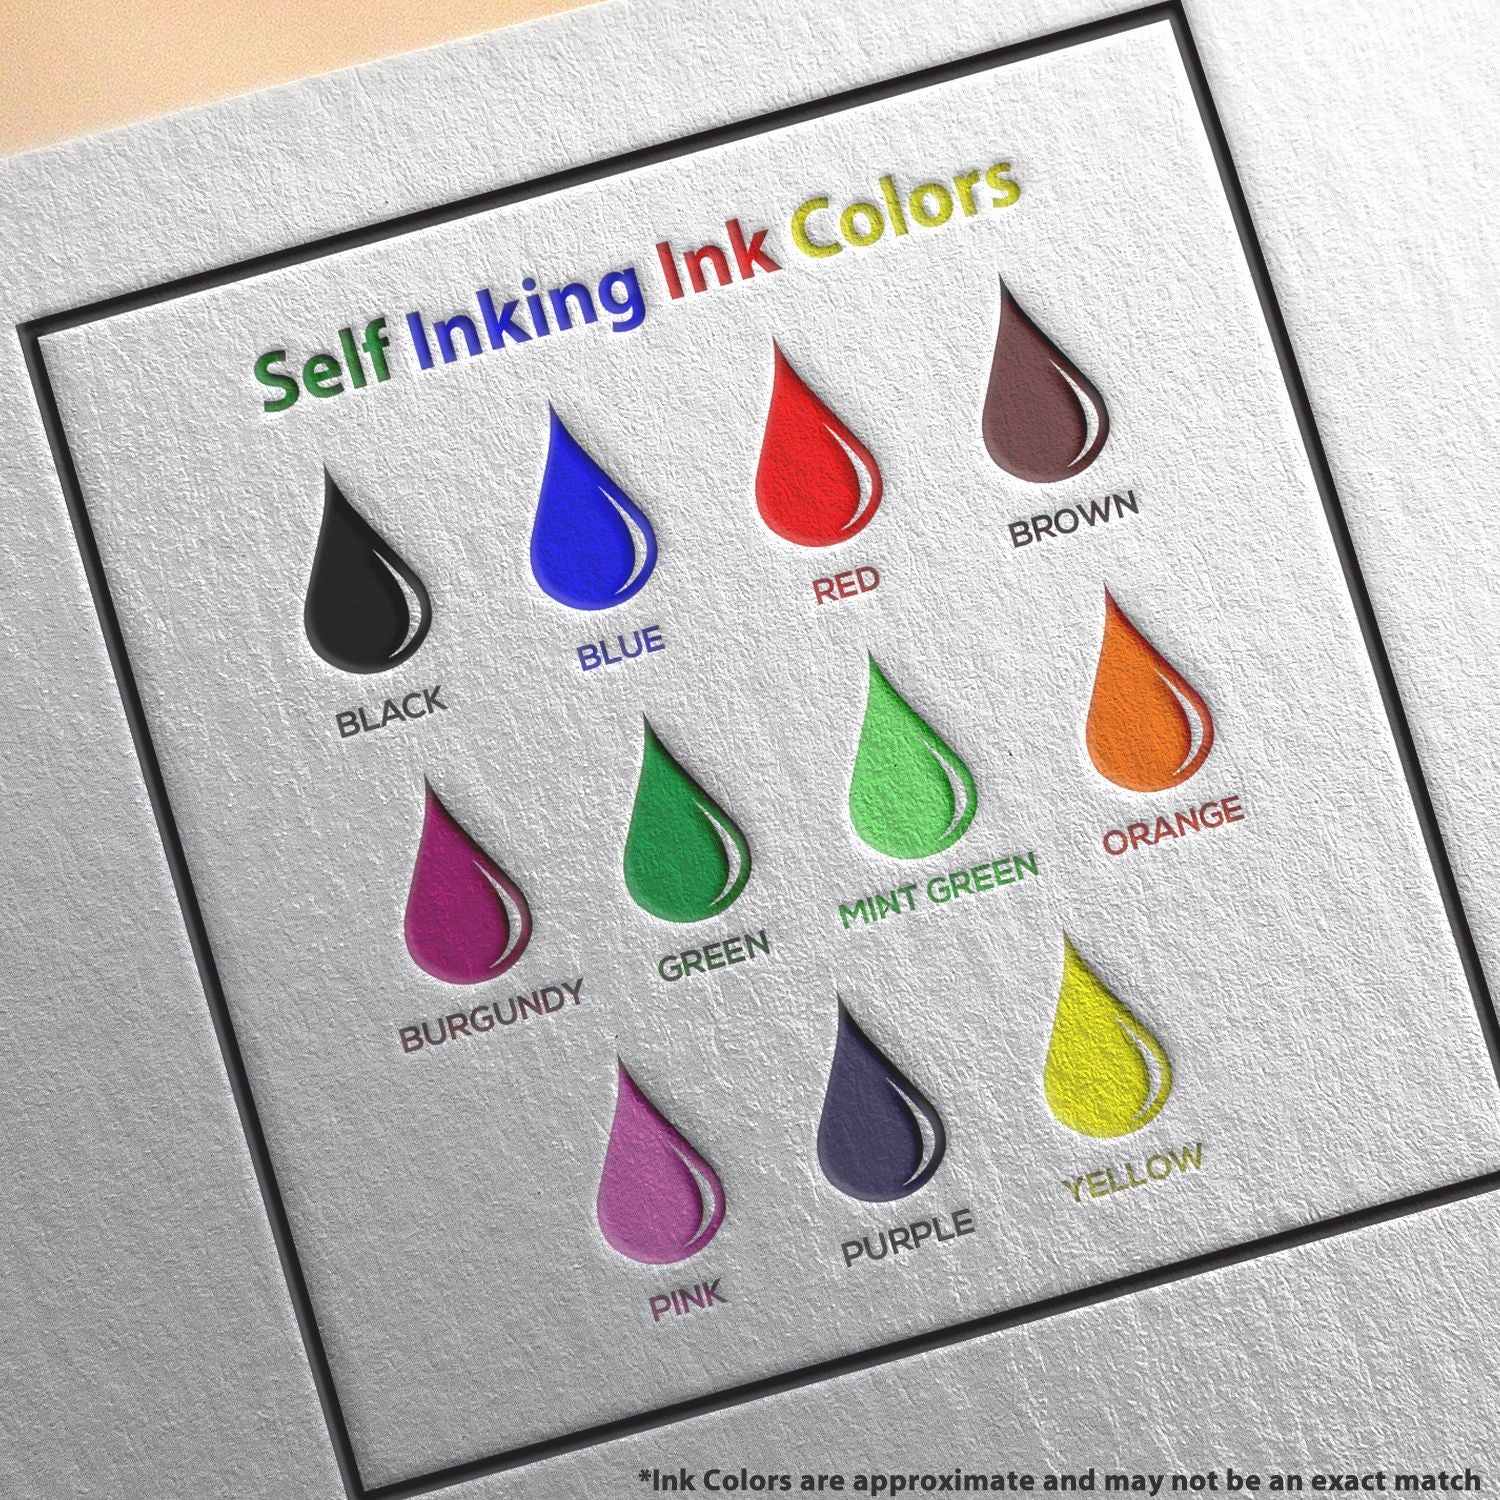 A picture showing the different ink colors or hues available for the Self-Inking Iowa PE Stamp product.